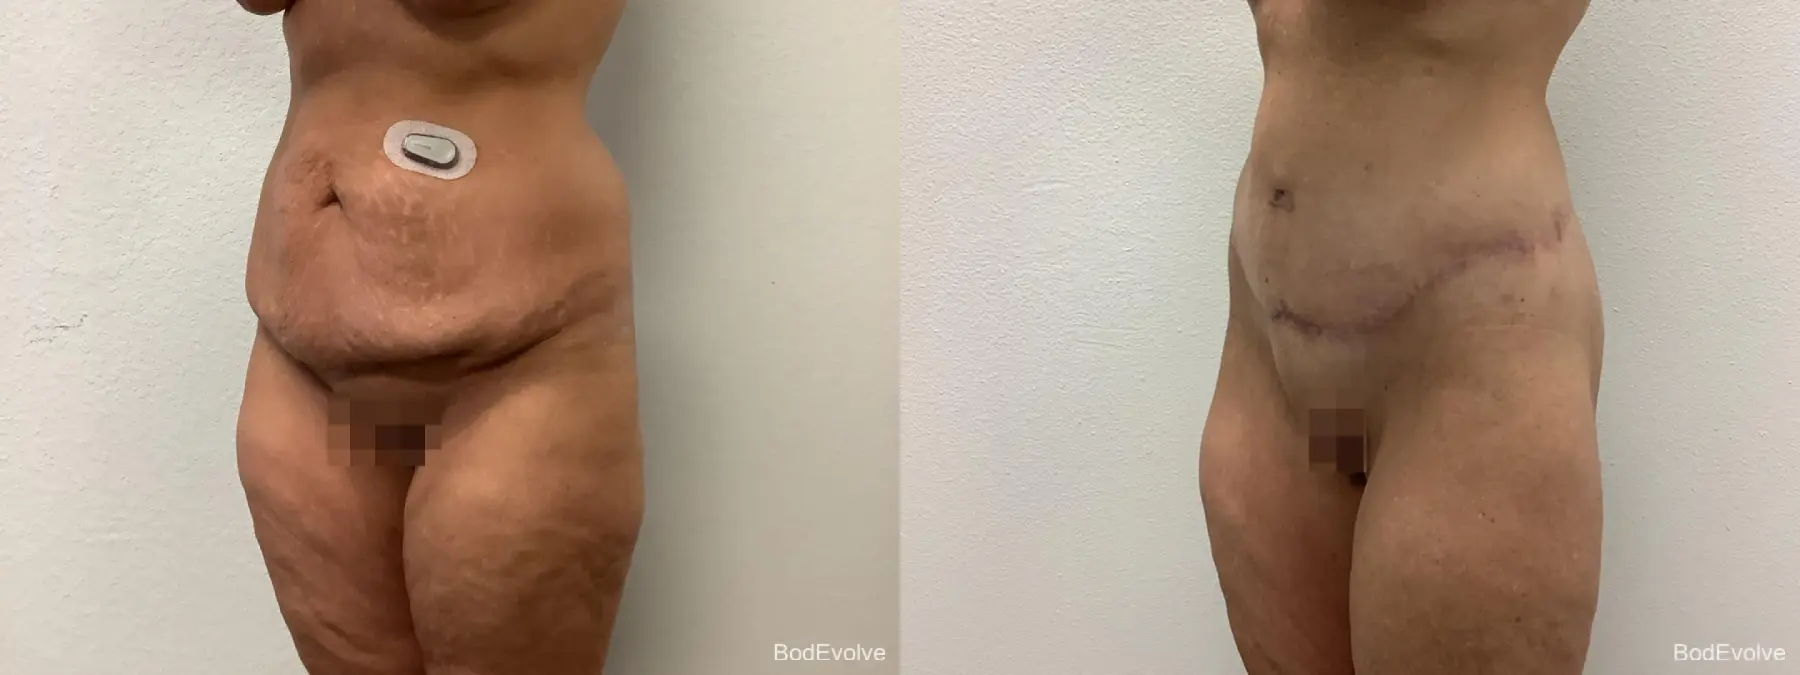 Body Lift: Patient 3 - Before and After 2